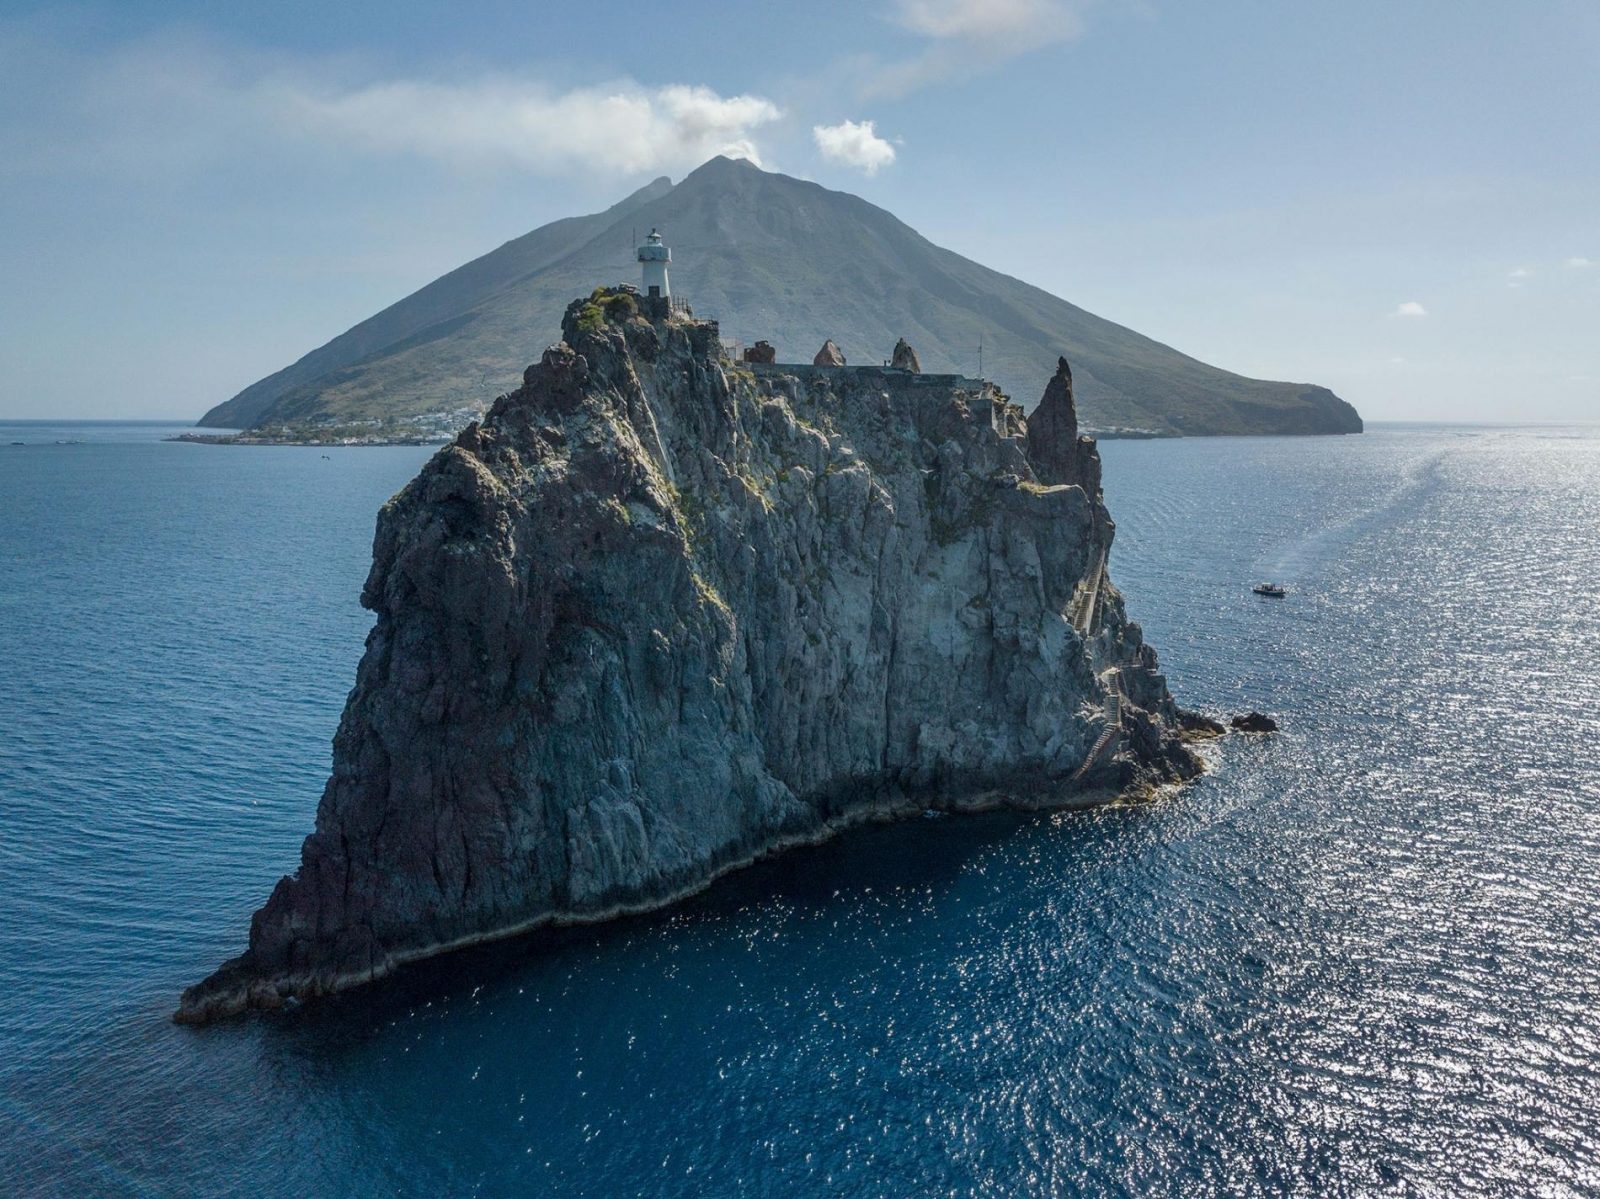 Scoring Less Than 75% On This Science Quiz Means You Should Go Back to School Stromboli Volcano Italy07.ngsversion.1576525510427.adapt.1900.1